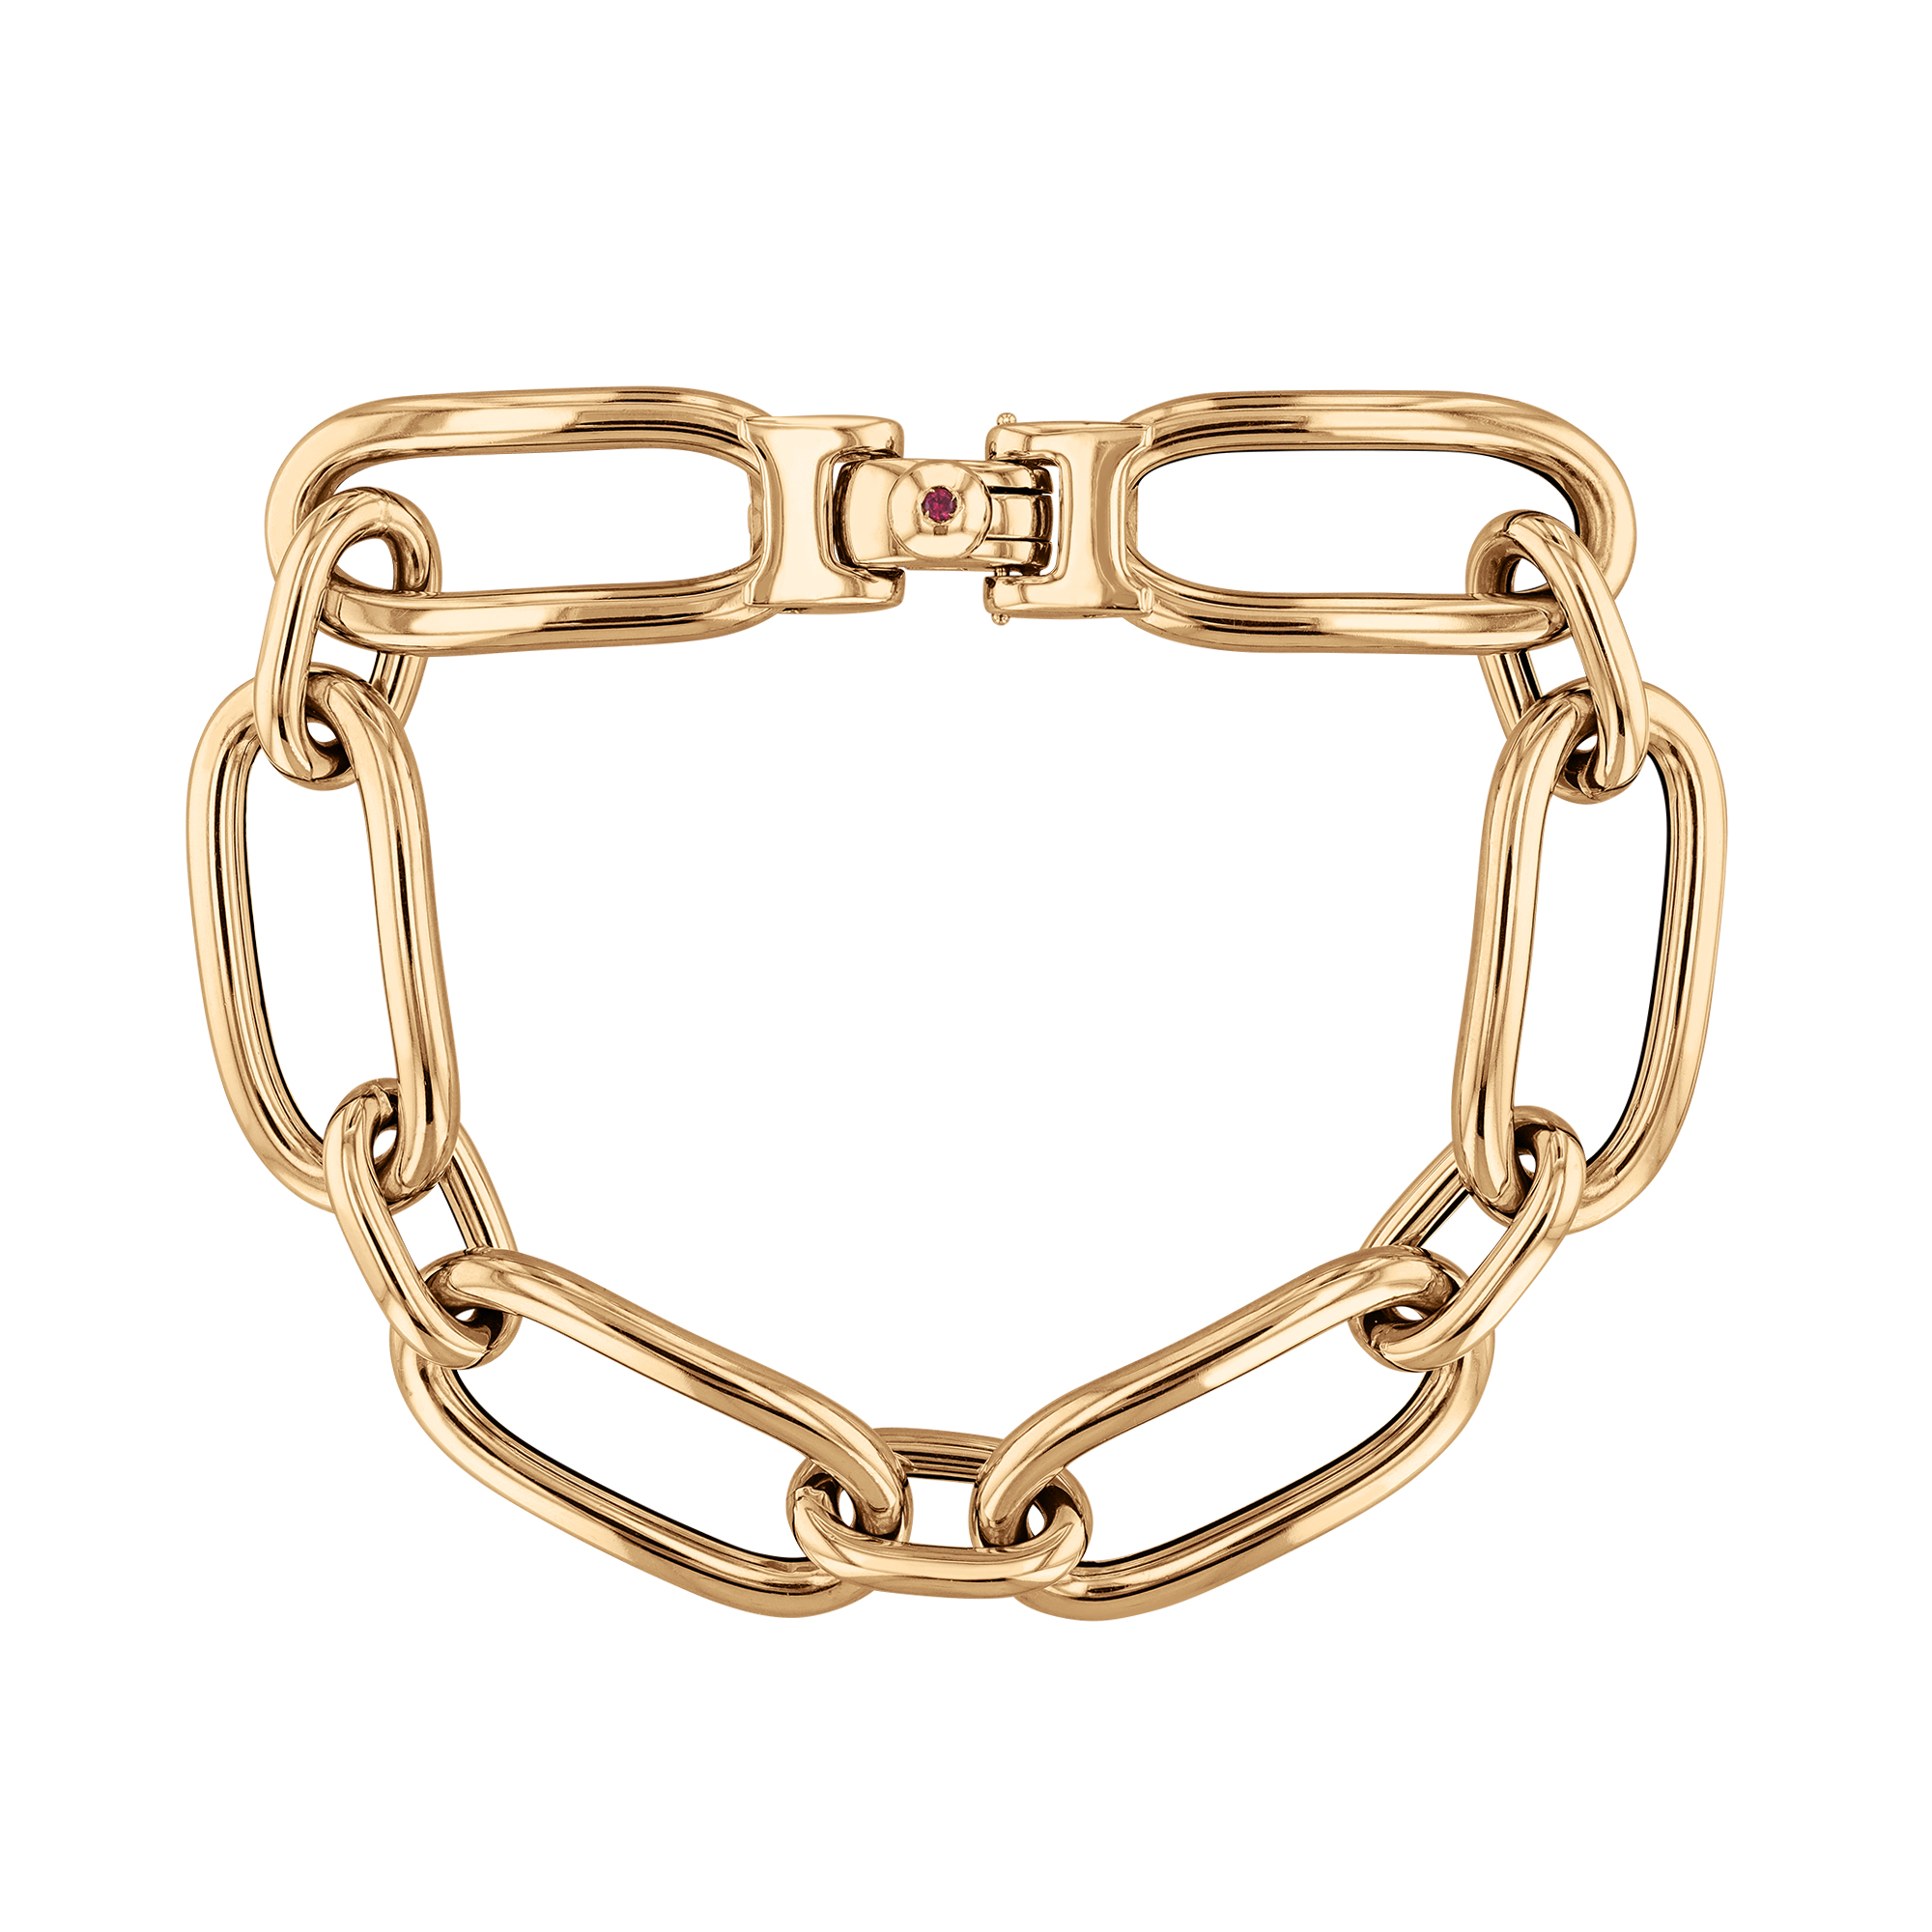 Roberto Coin Designer Yellow Gold Large Link Bracelet | 7 Inches